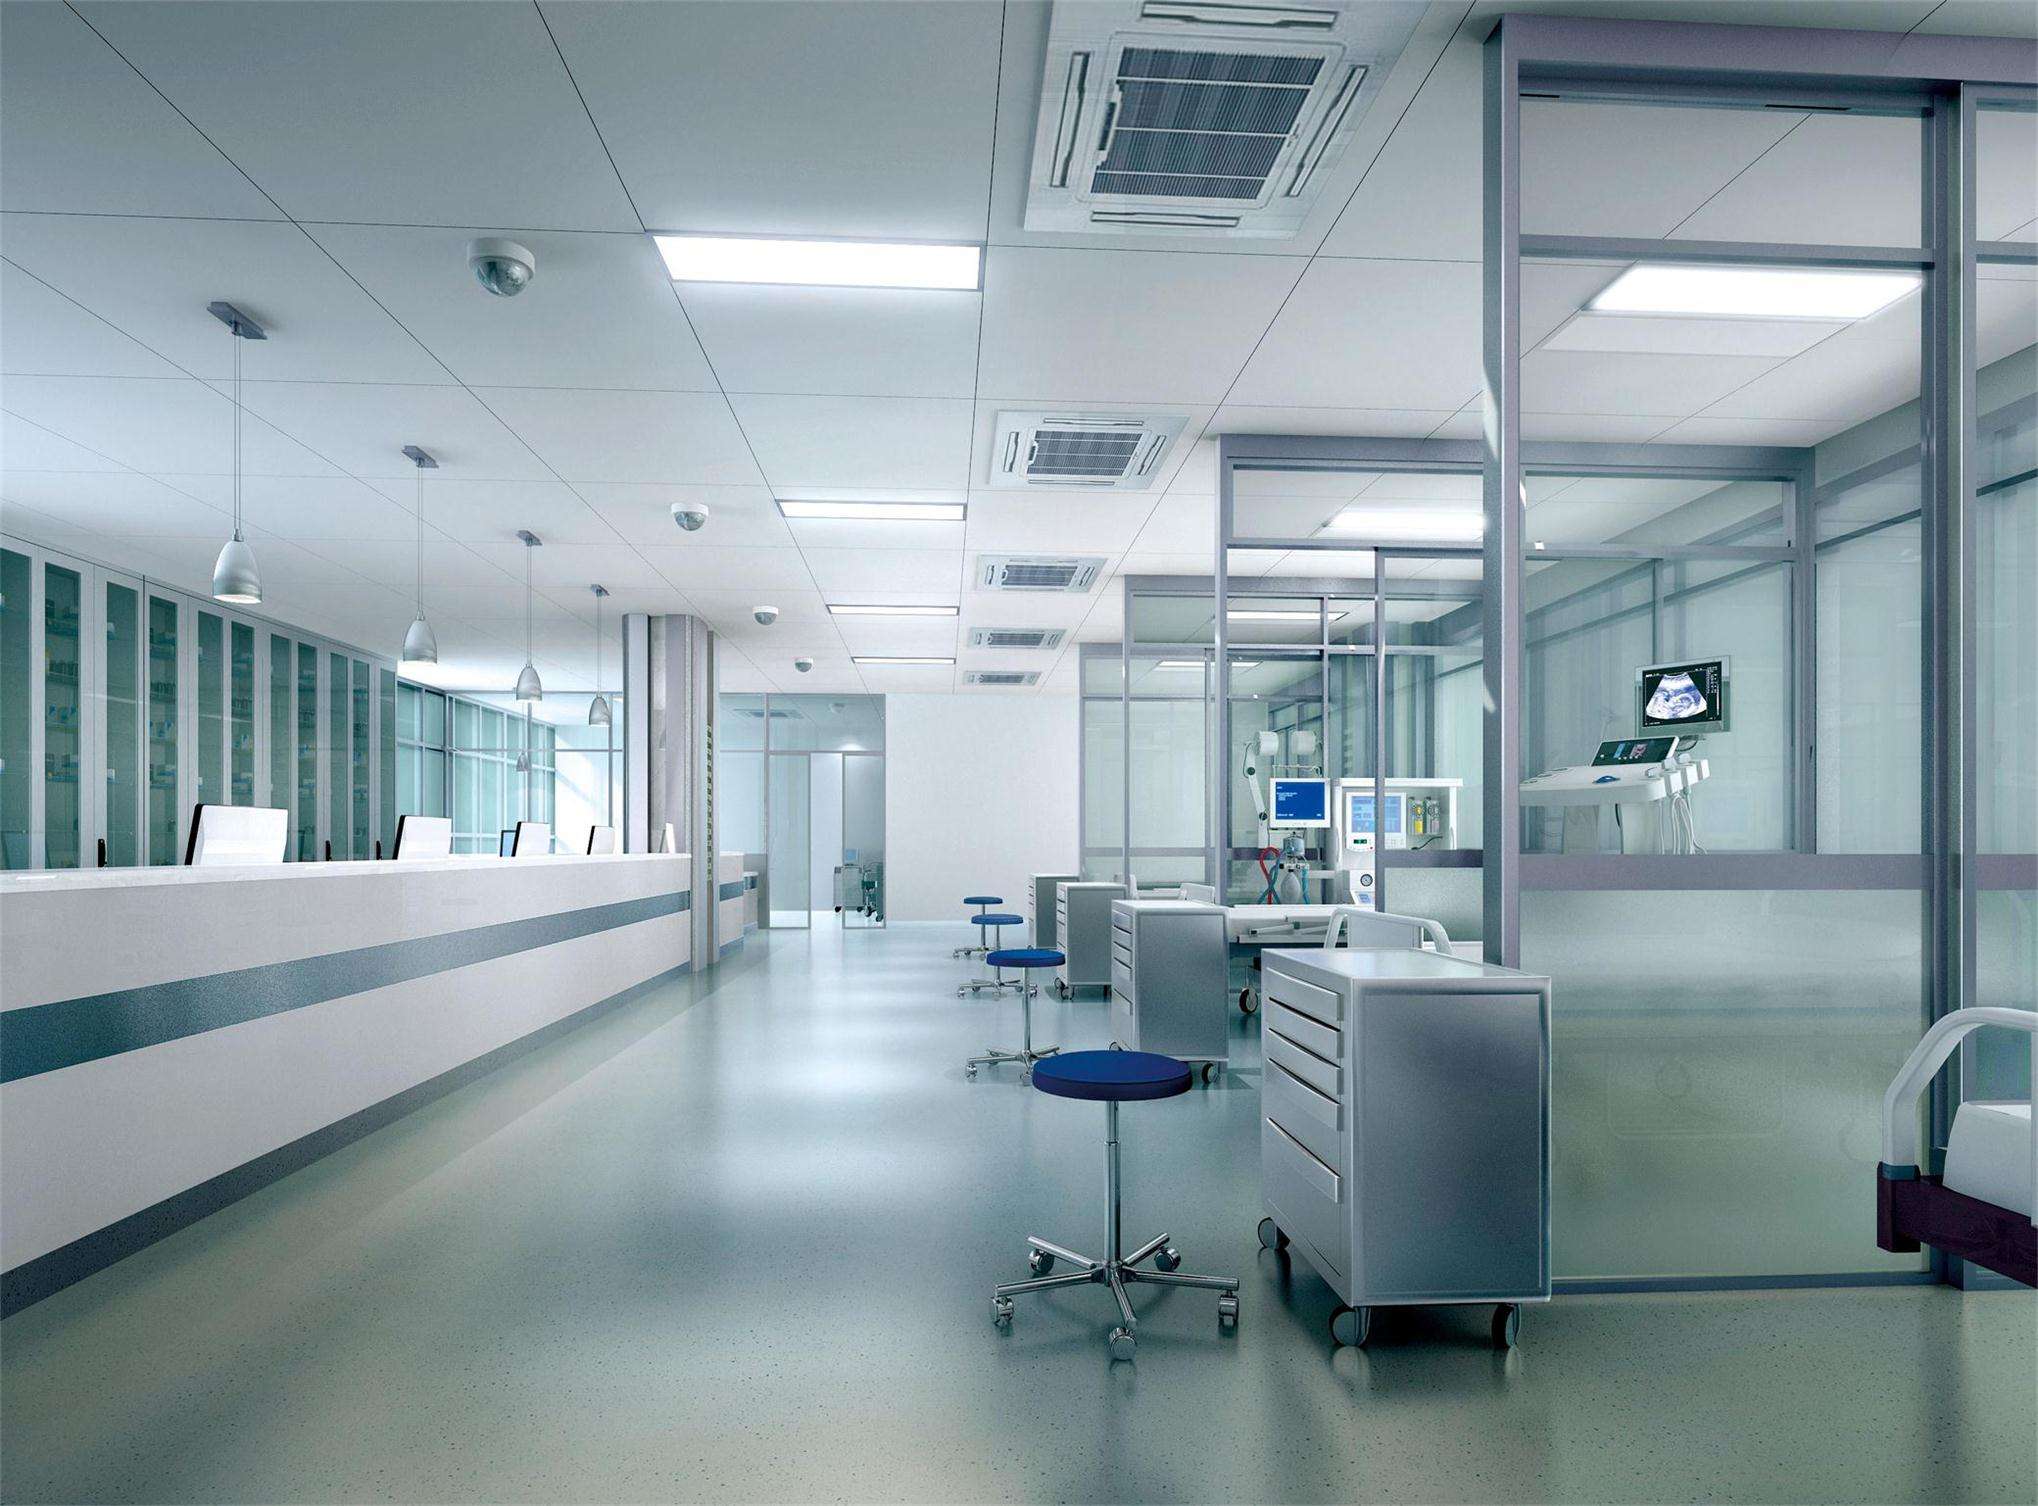 Design and construction of ICU operating clean room